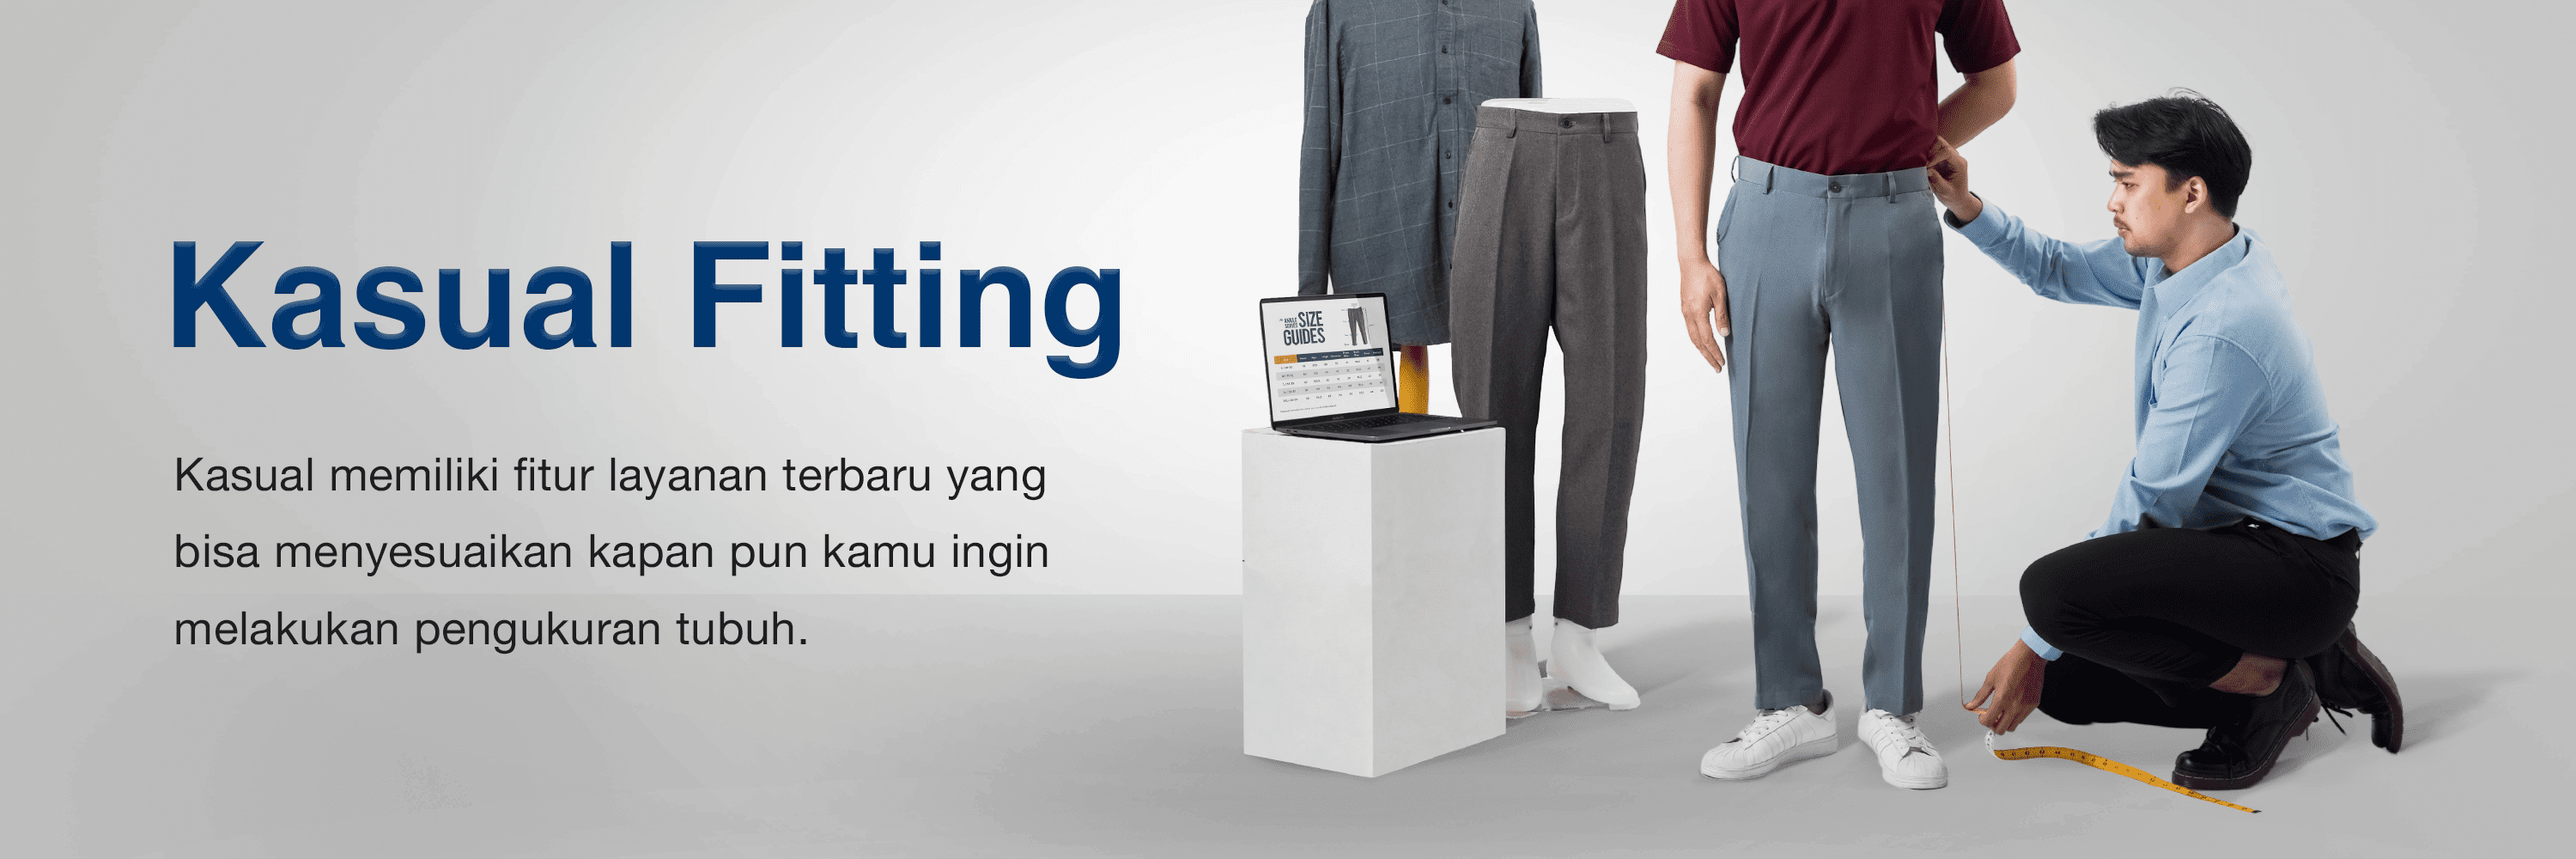 Kasual Fitting 3×1